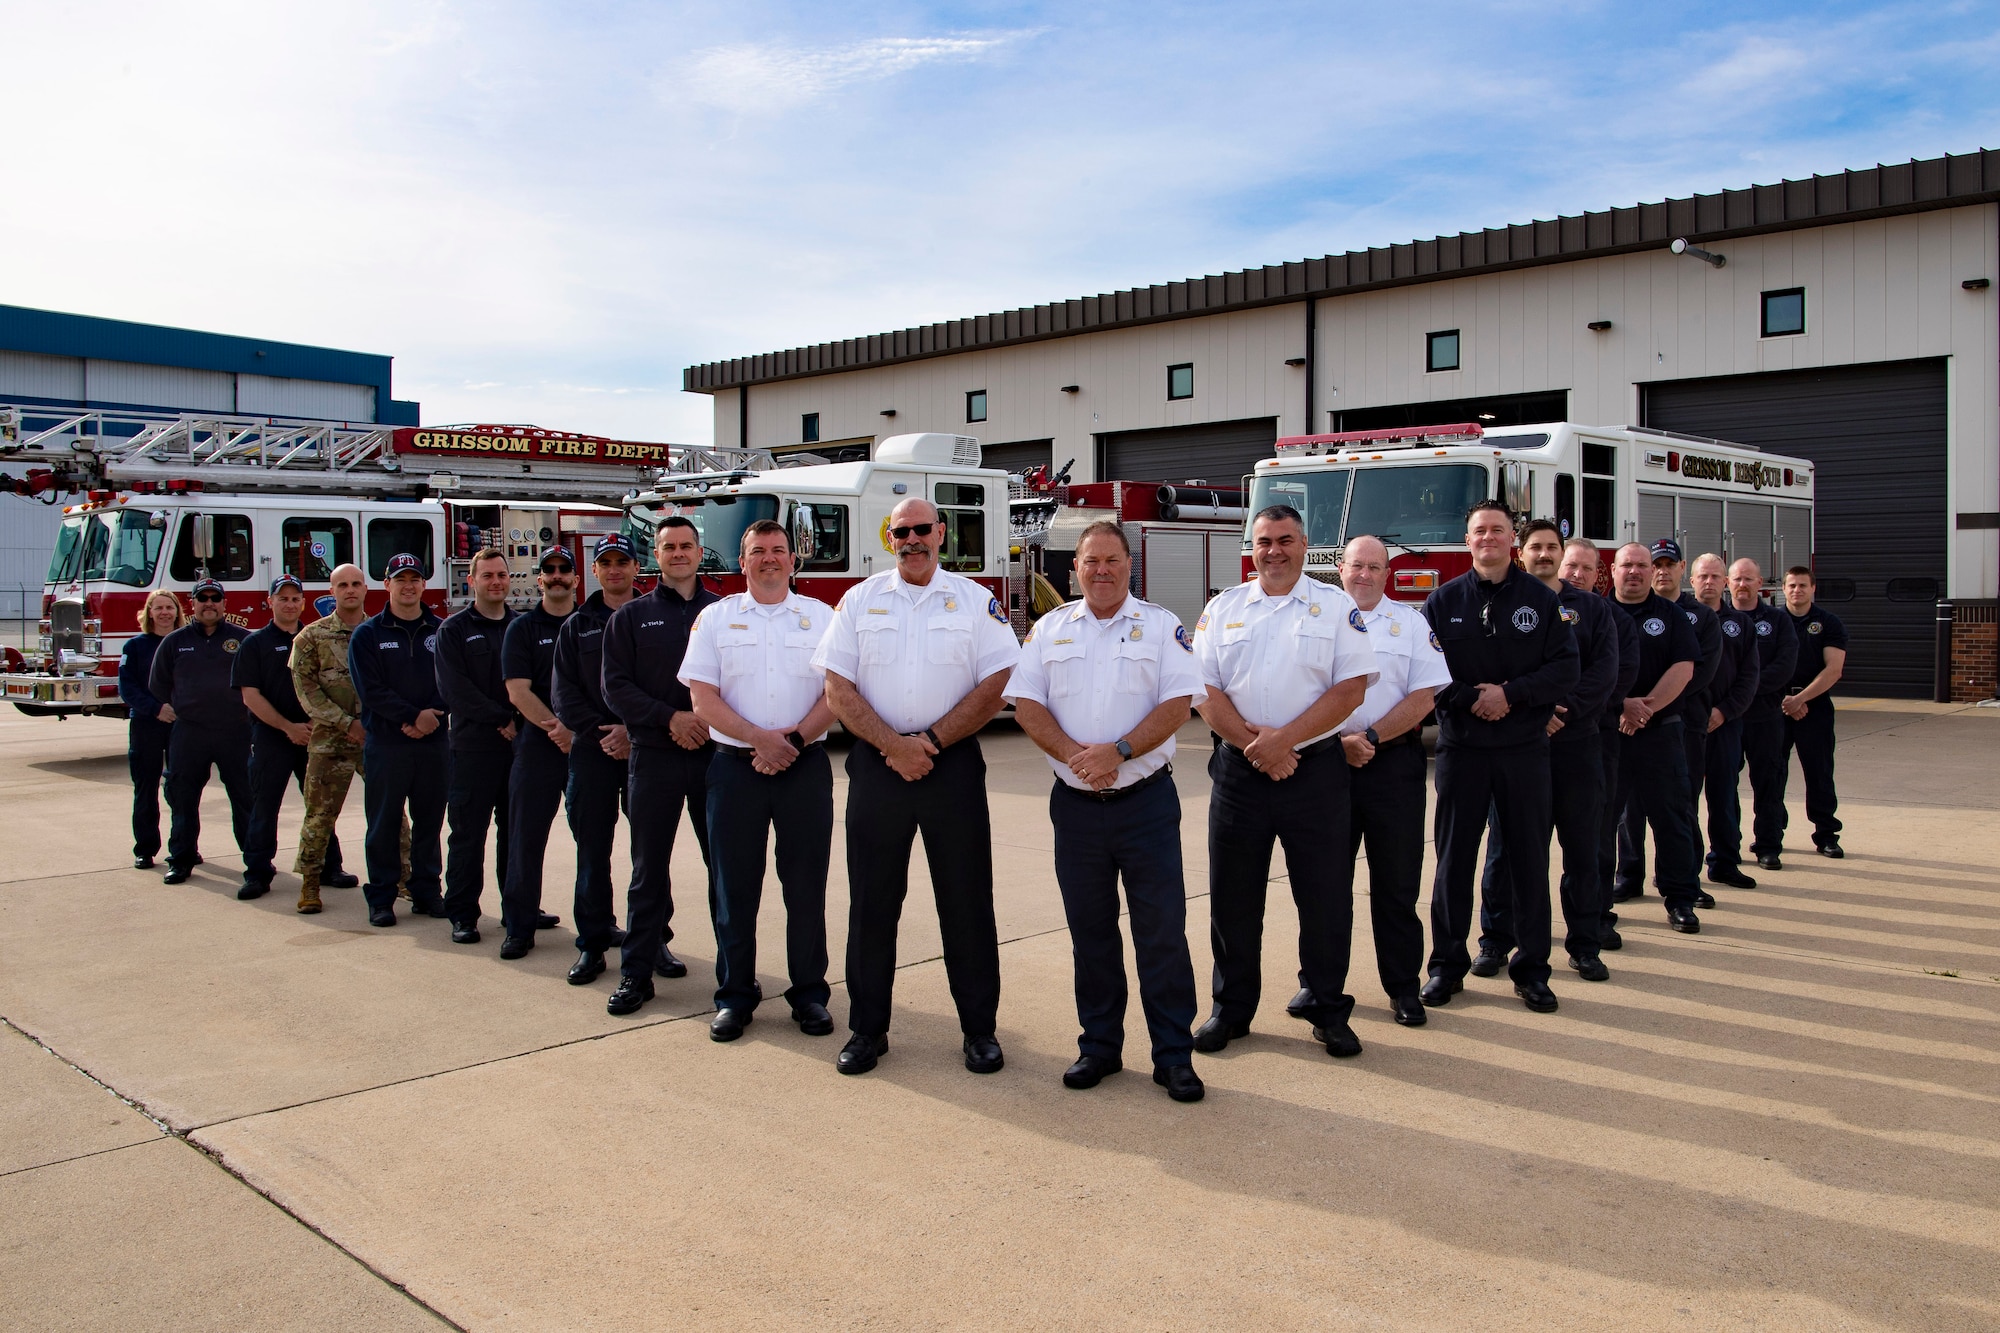 Members of the Grissom fire department pose for a photo at Grissom Air Reserve Base, Indiana on May 20, 2021. The department was recently awarded as the 2020 Chief Master Sgt. Ralph E. Sandborn Award, as the best medium size fire department in the Air Force Reserve Command. (U.S. Air Force photo by Tech Sgt. Josh Weaver)